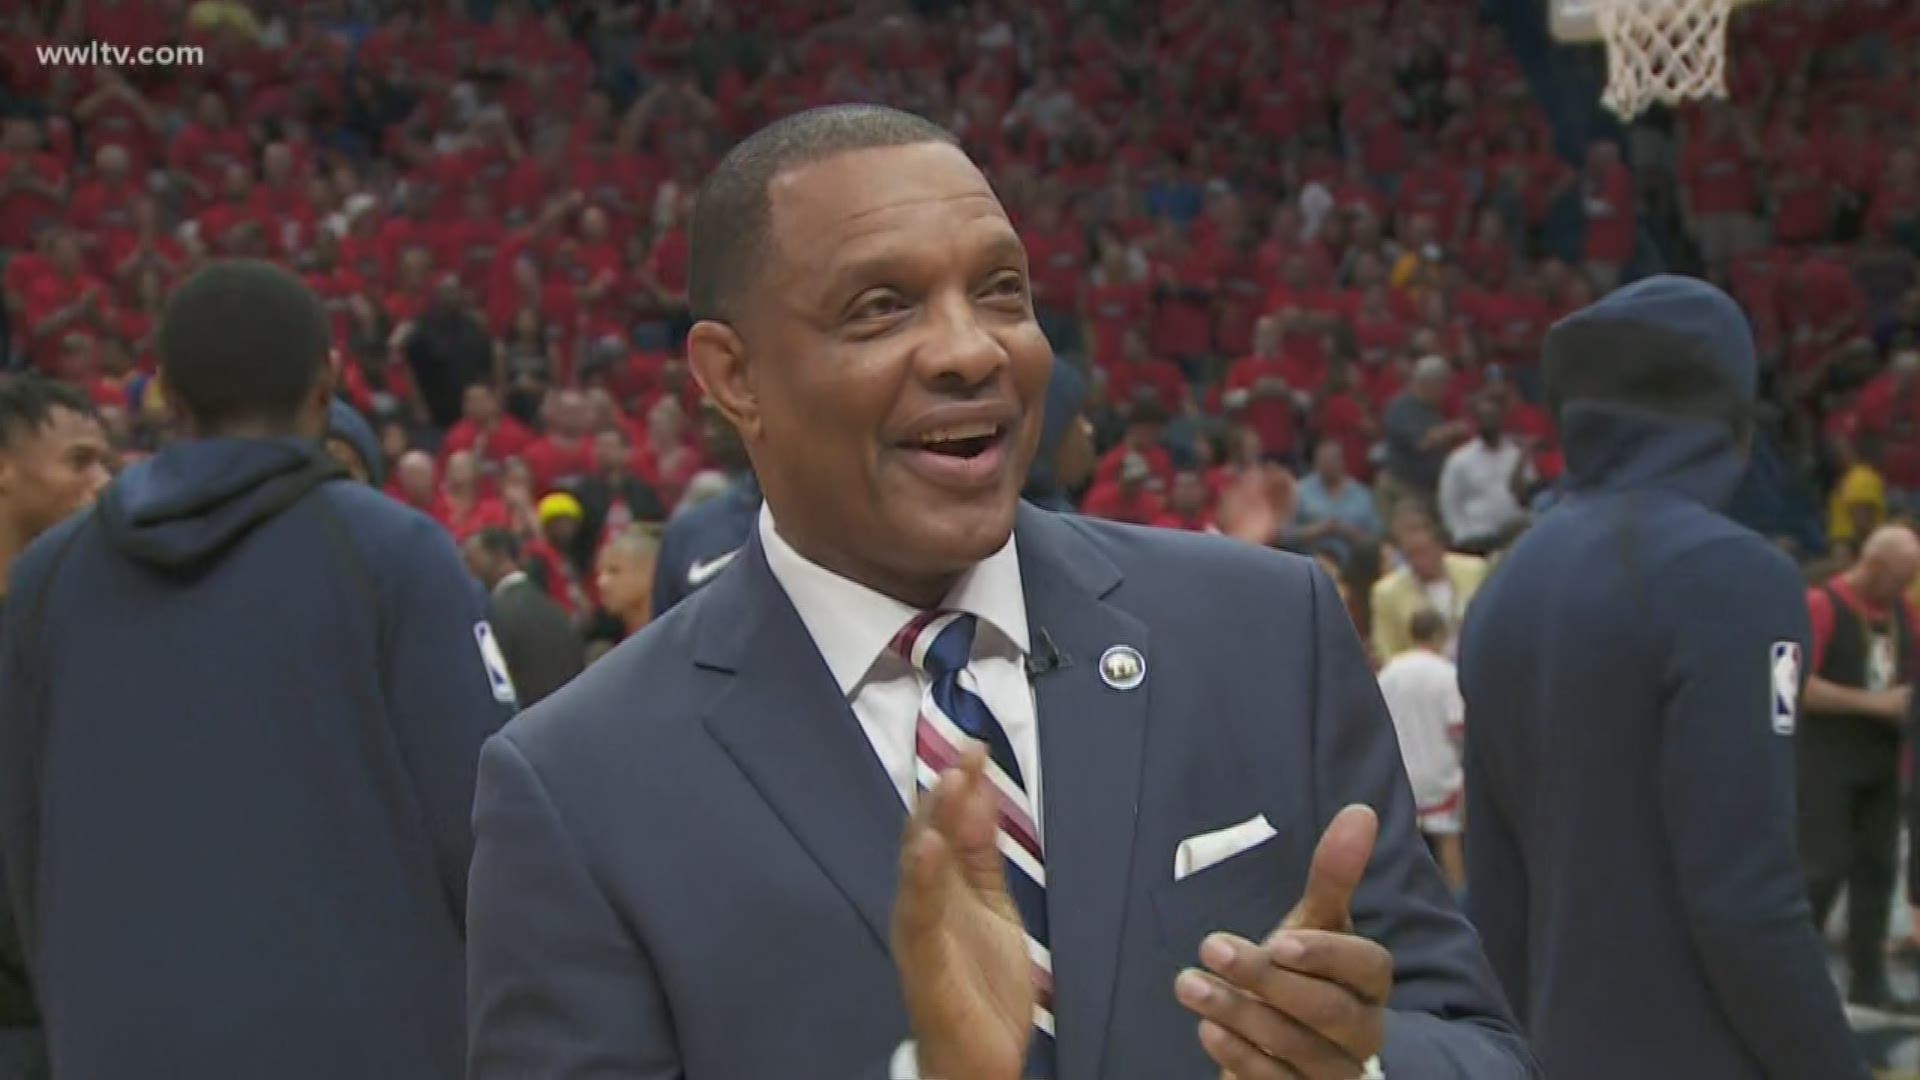 ESPN confirmed it Monday: The Pelicans have picked up the team option for head coach Alvin Gentry through the 2020-2021 season.